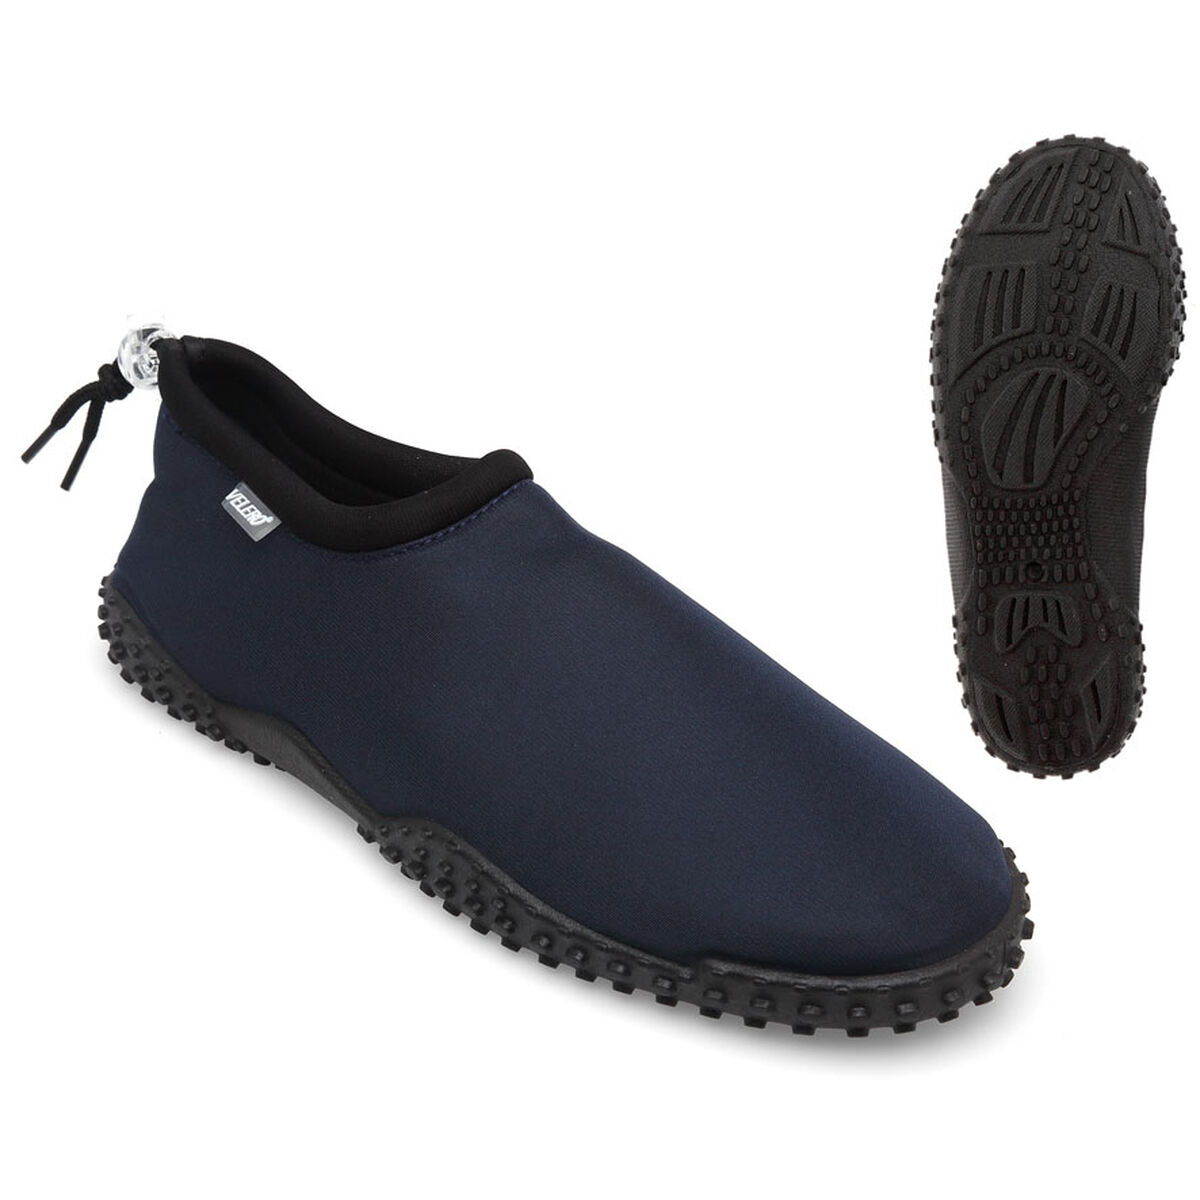 Chaussons Adultes unisexes